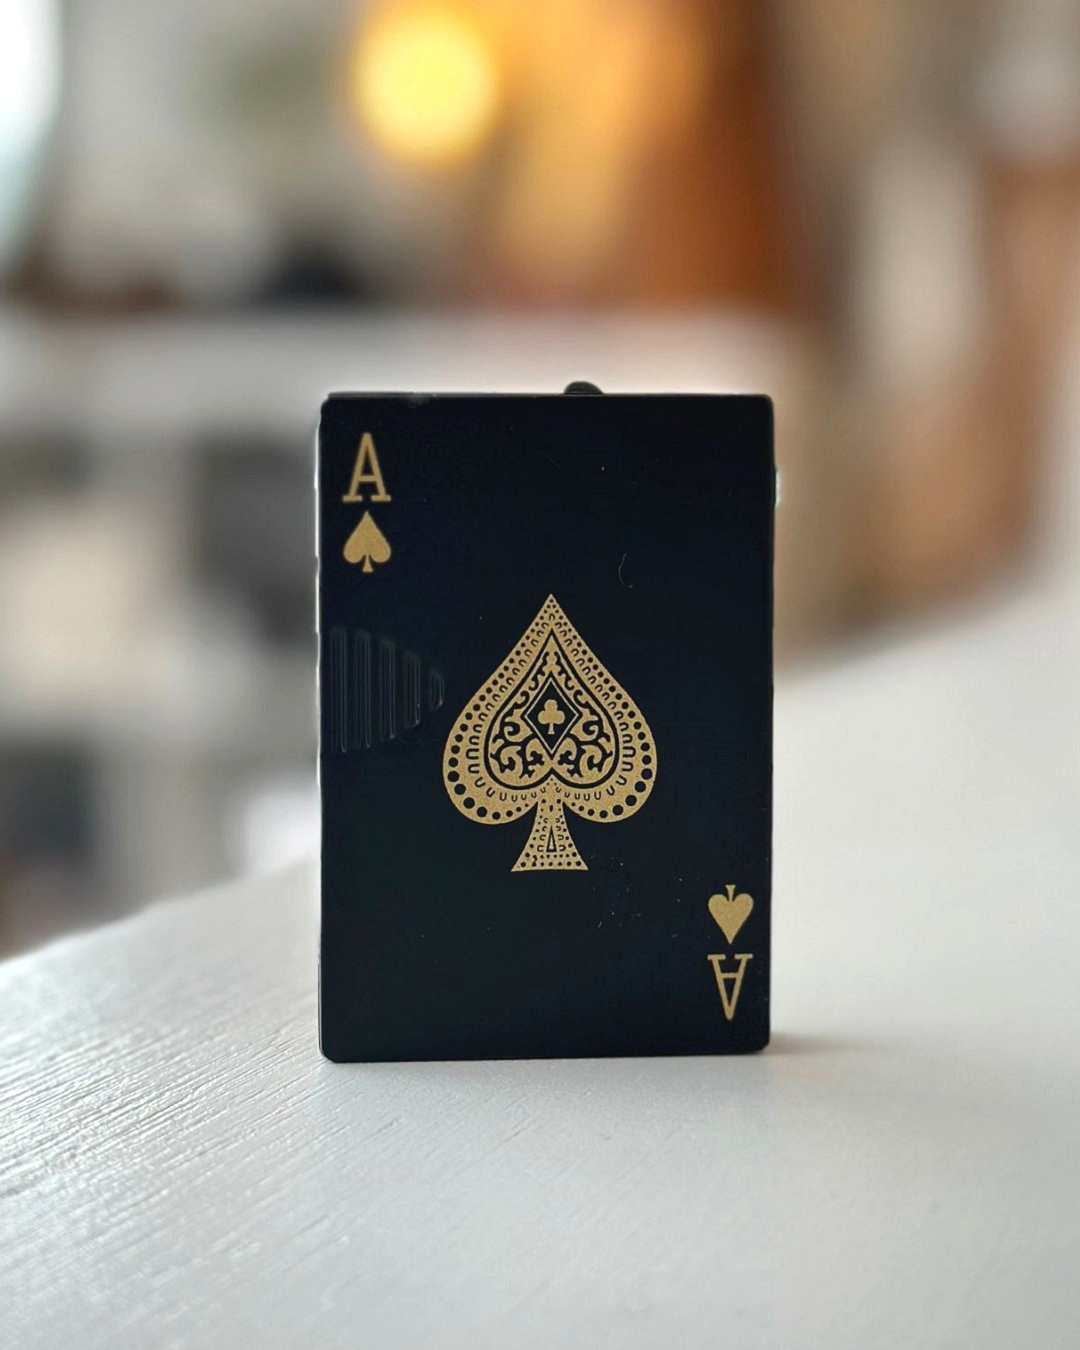 Black Ace of cards lighter on table